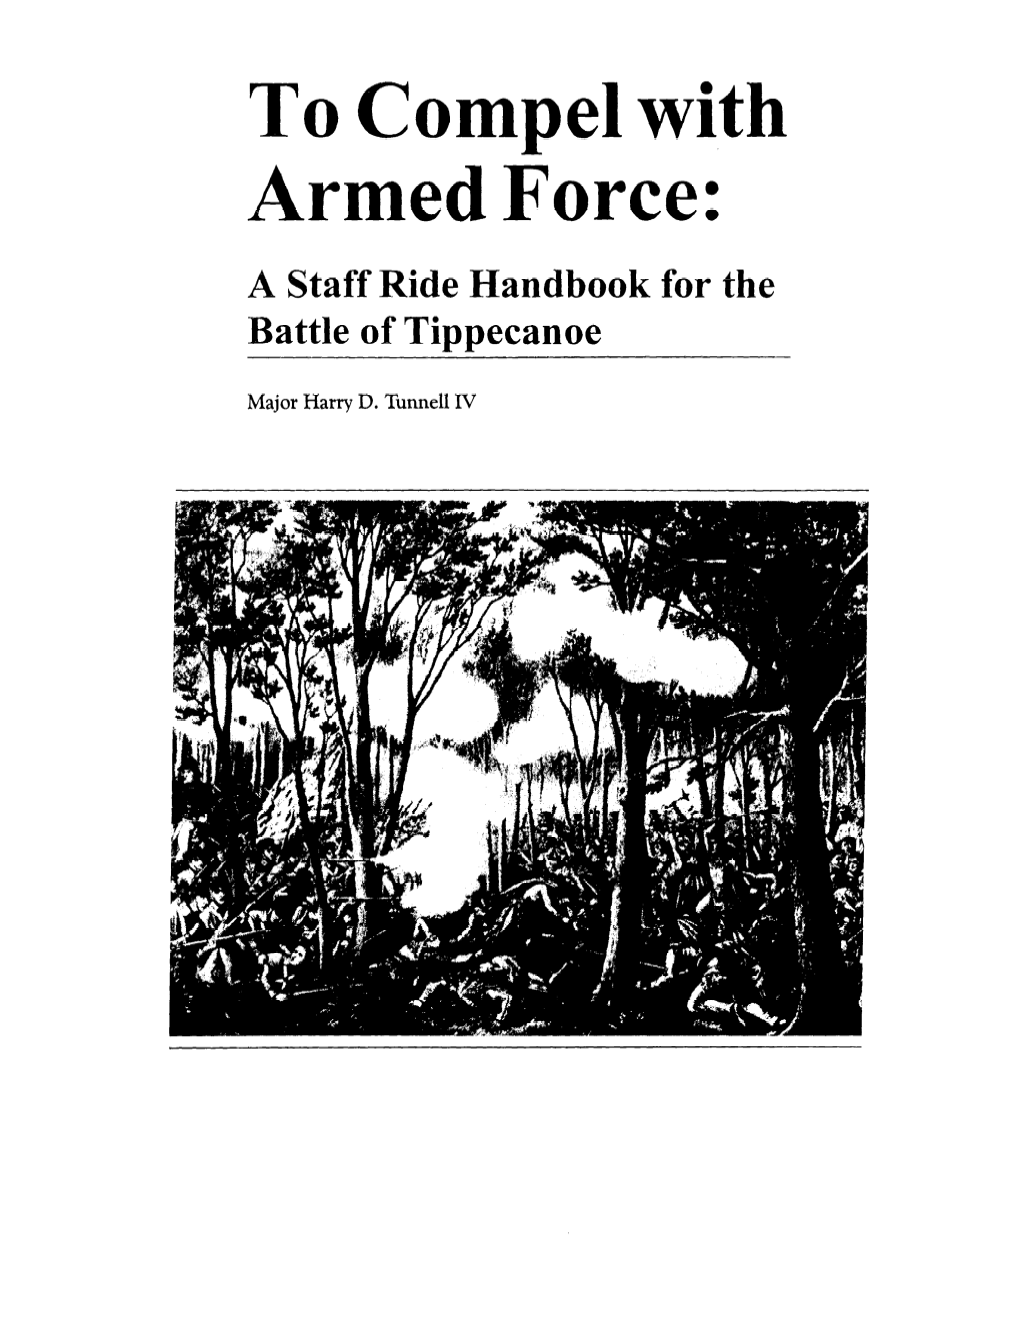 To Compel with Armed Force: a Staff Ride Handbook for the Battle of Tippecanoe